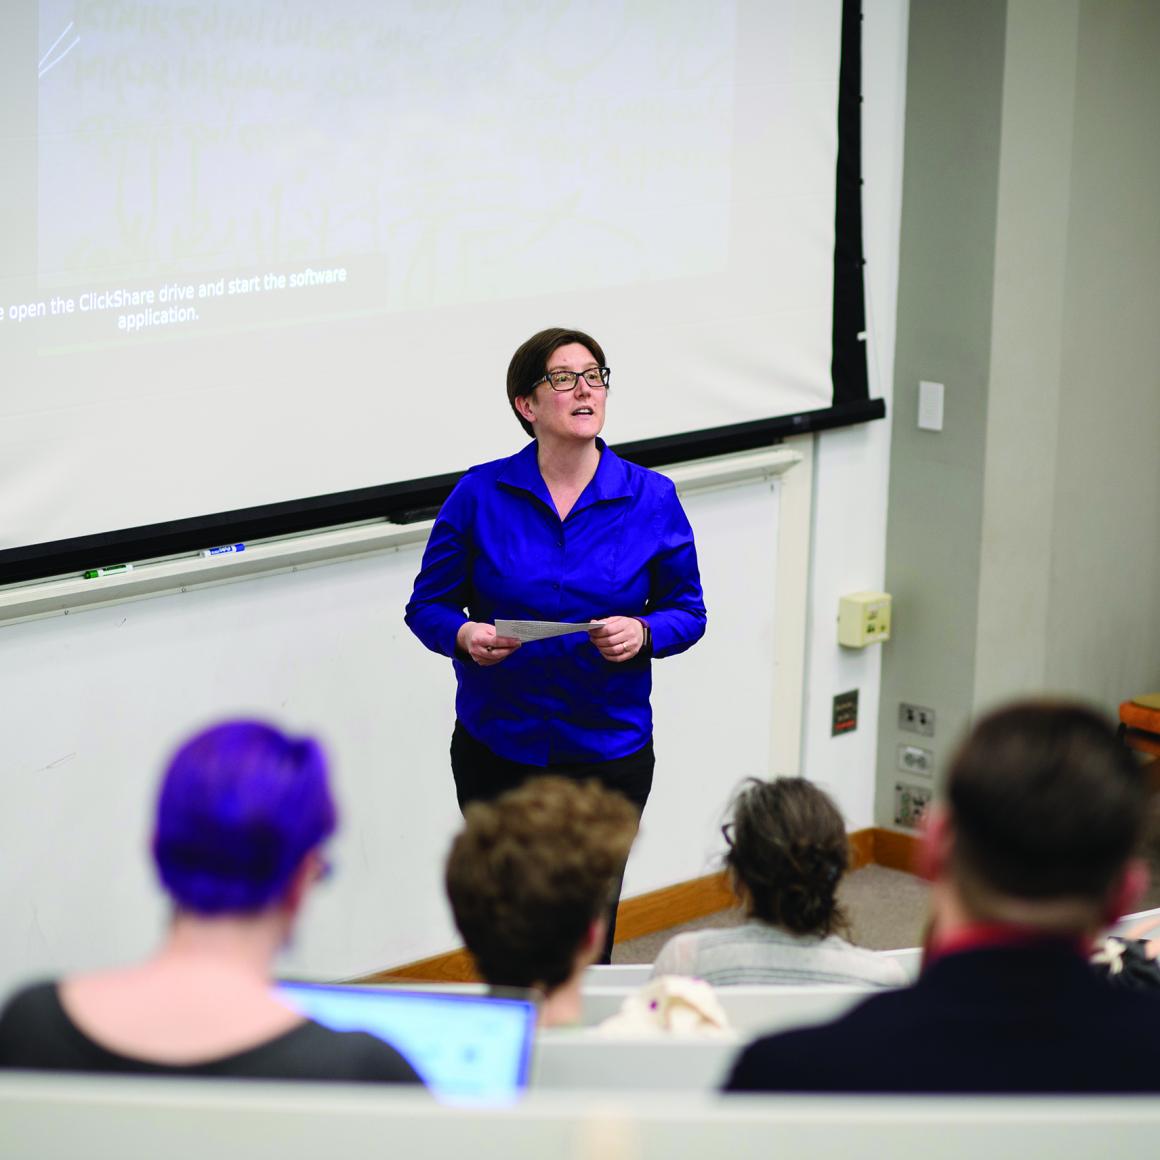 Professor Jennifer Rexford delivers lecture to students with projection screen behind her